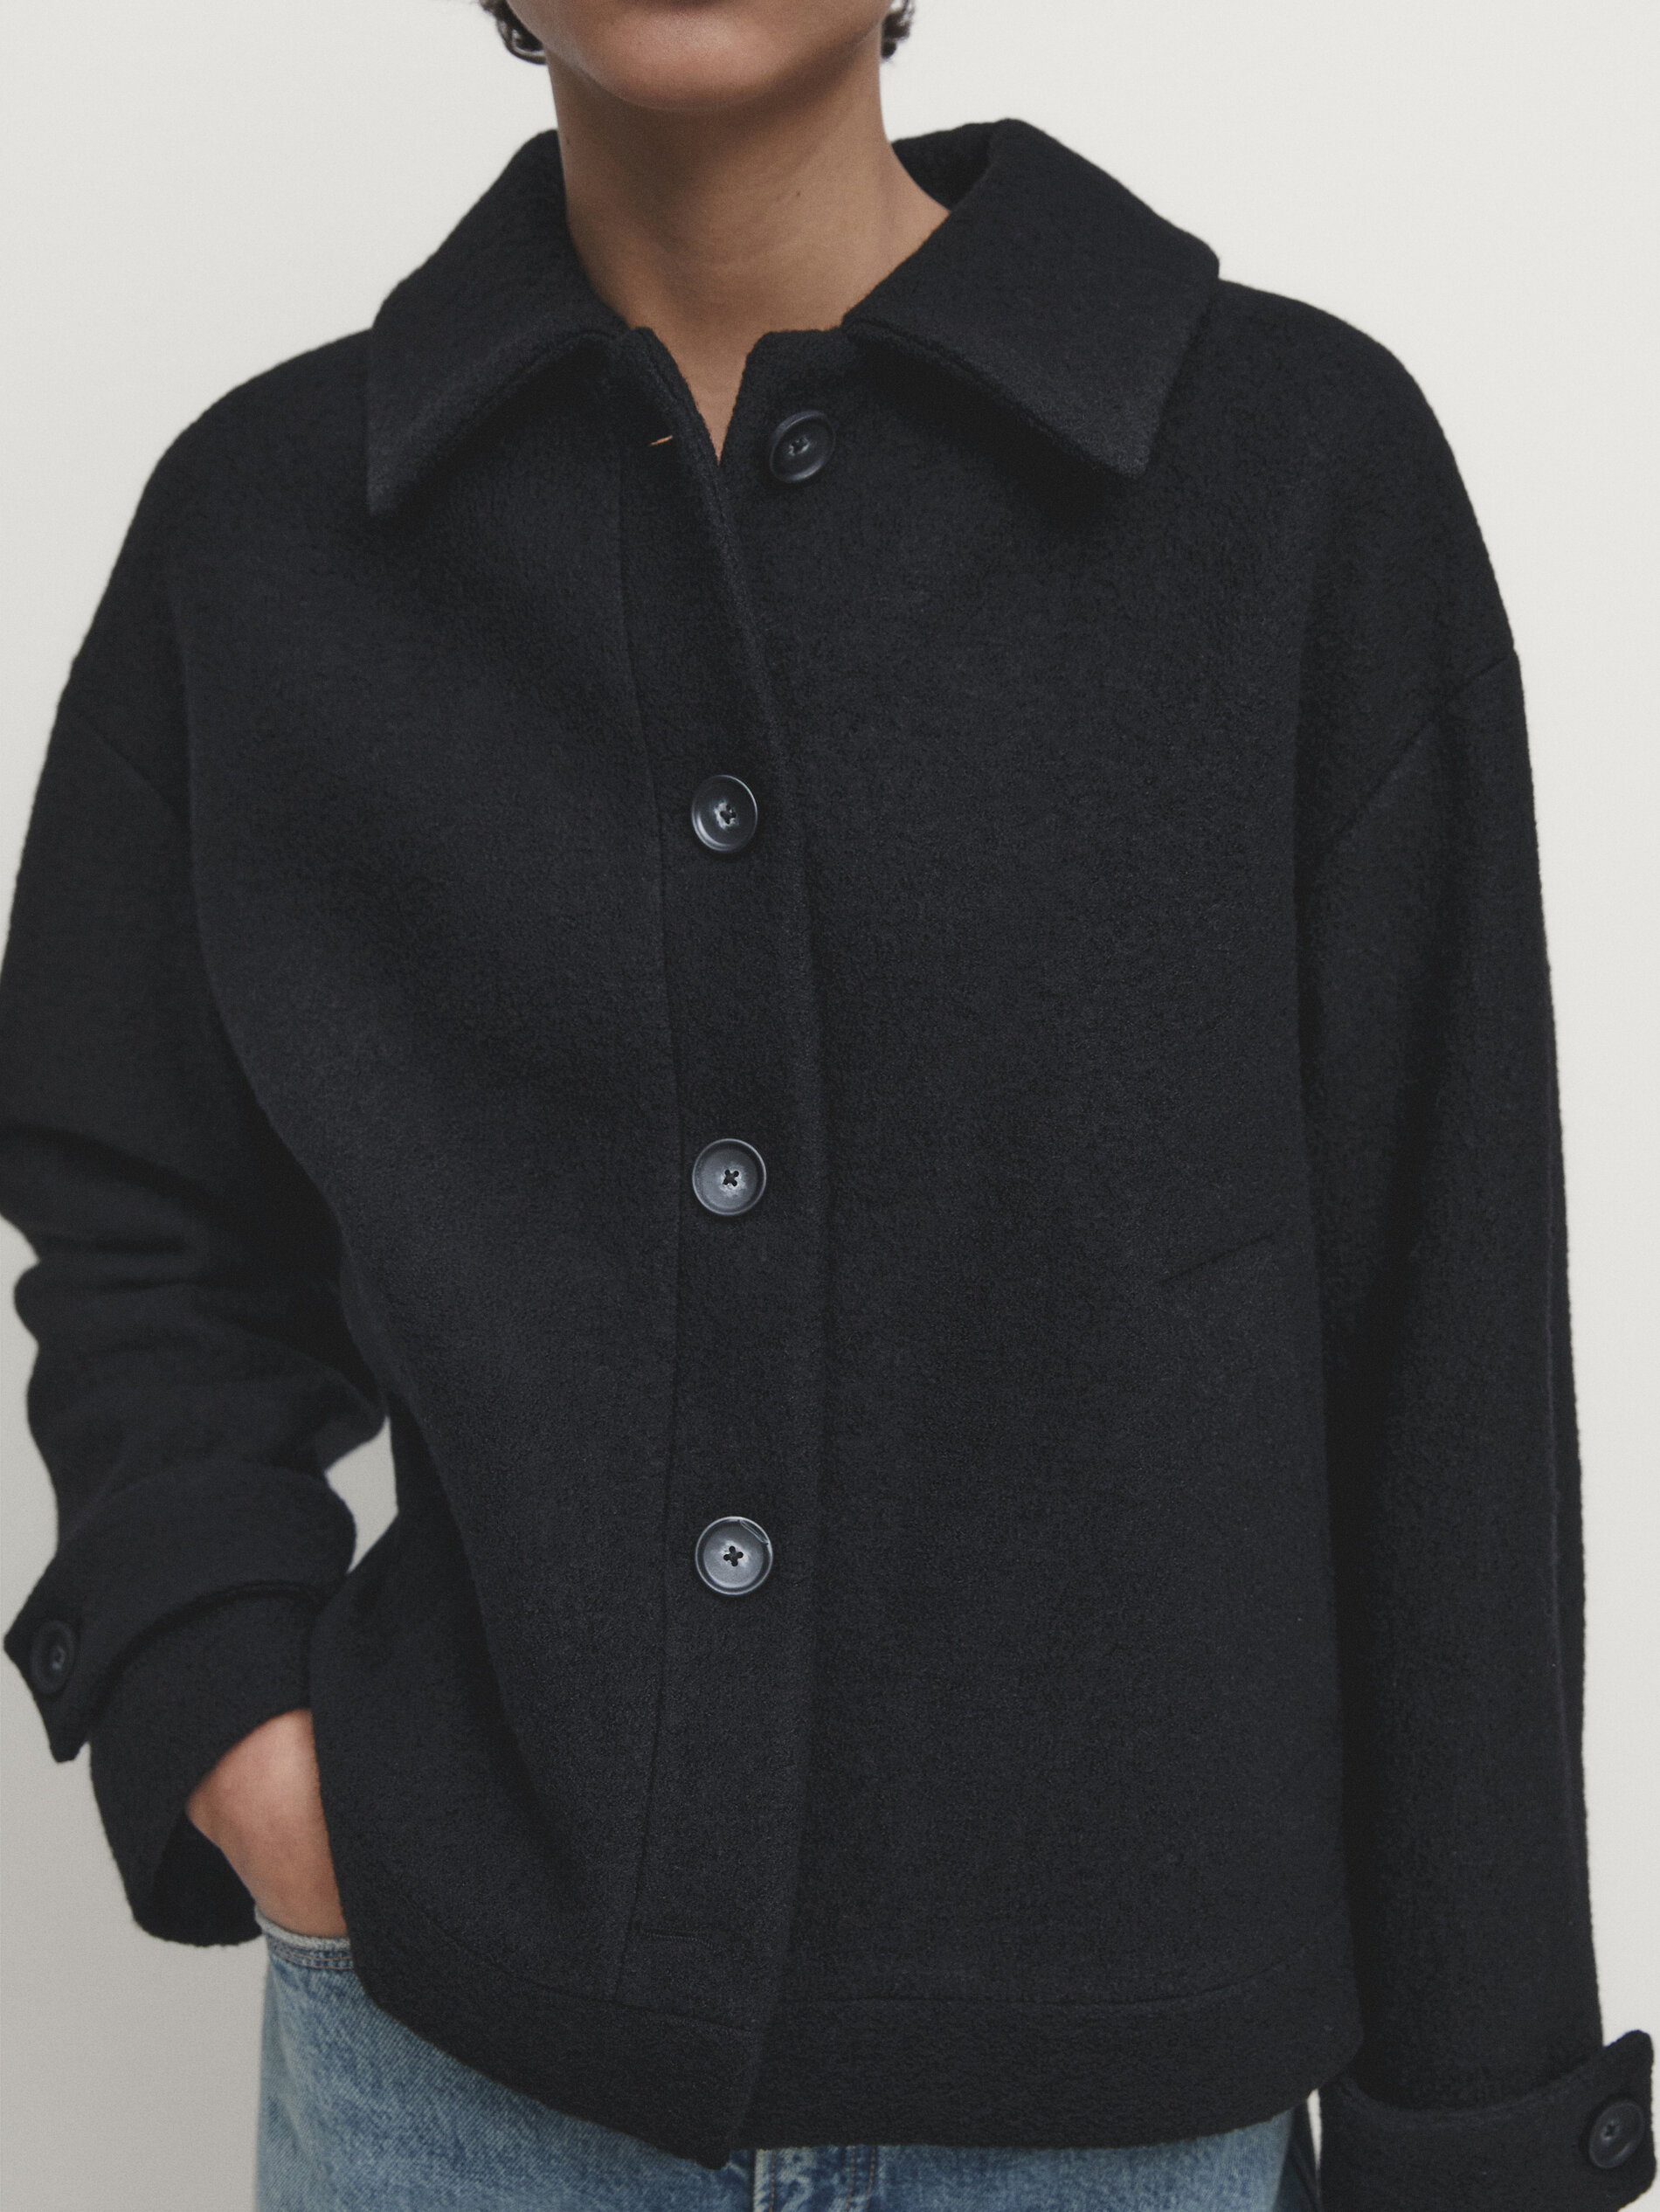 100% wool jacket with buttons